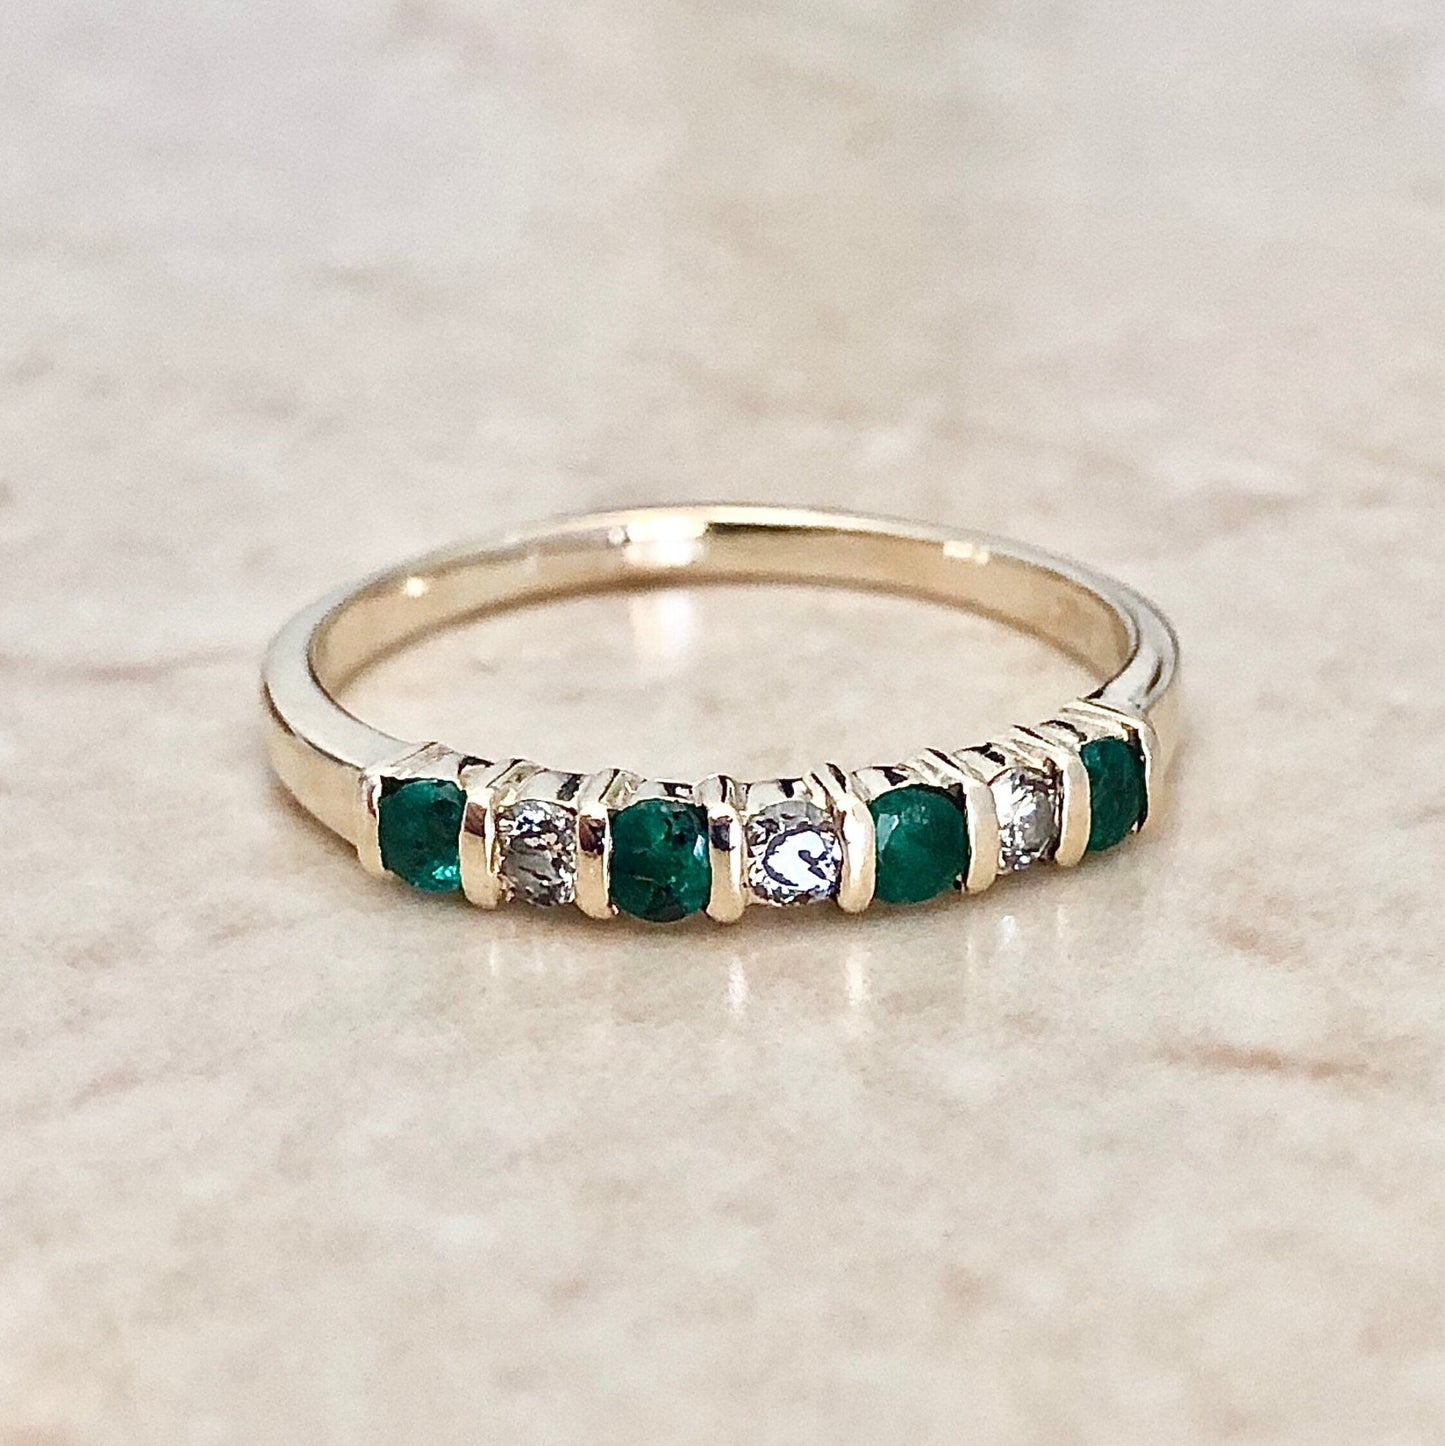 Vintage Natural Emerald & Diamond Ring - 14K Yellow Gold - Genuine Gemstone - April May Birthstone Gift - Size 9.25 US - Mother’s Day Gift